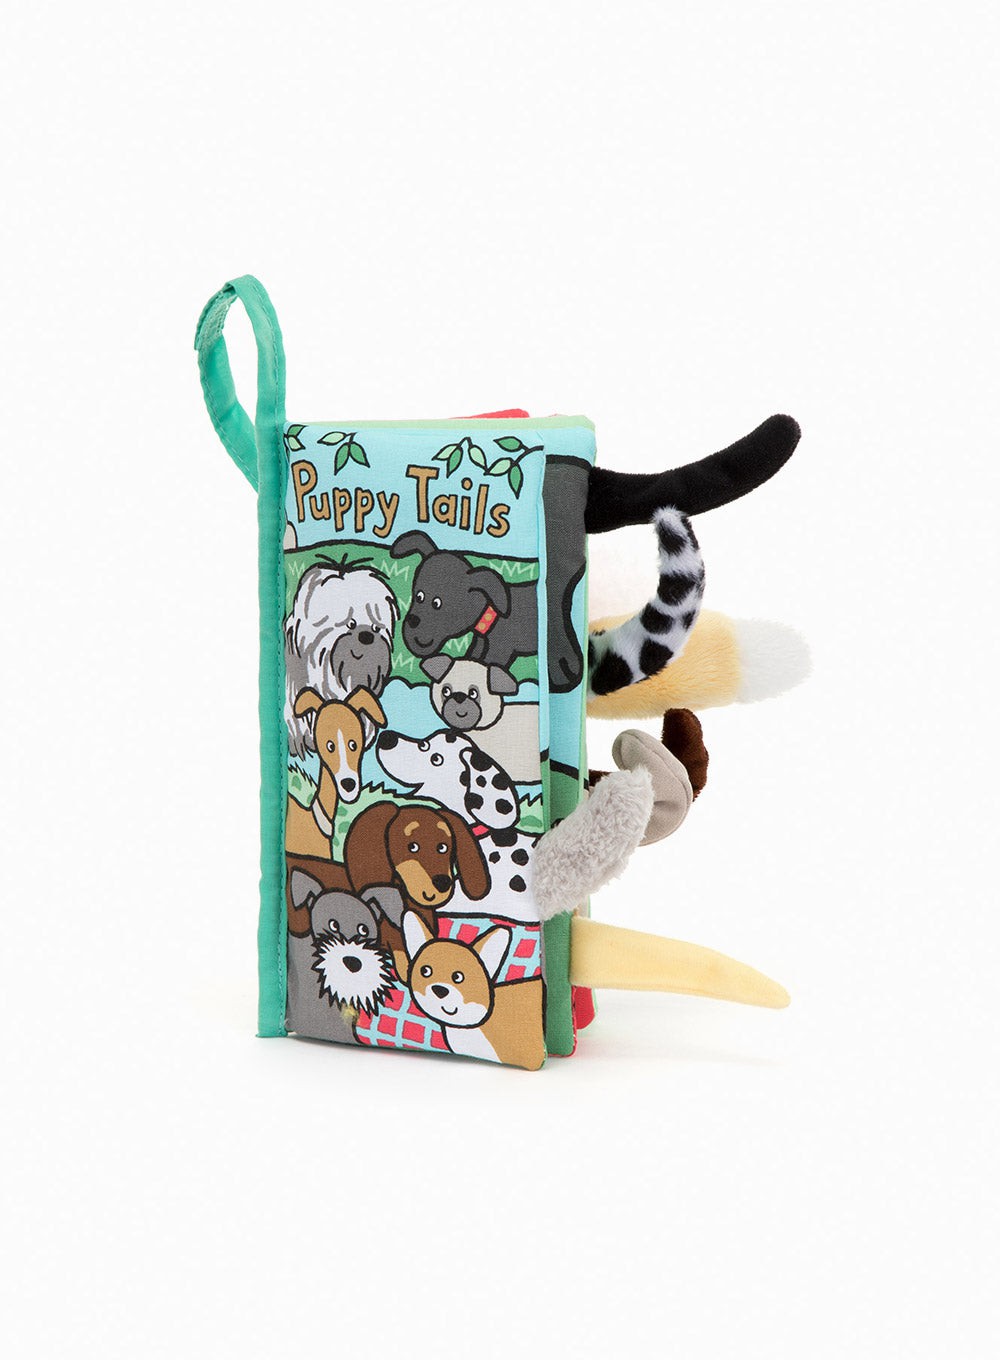 Jellycat Toy Jellycat Puppy Tails Activity Book